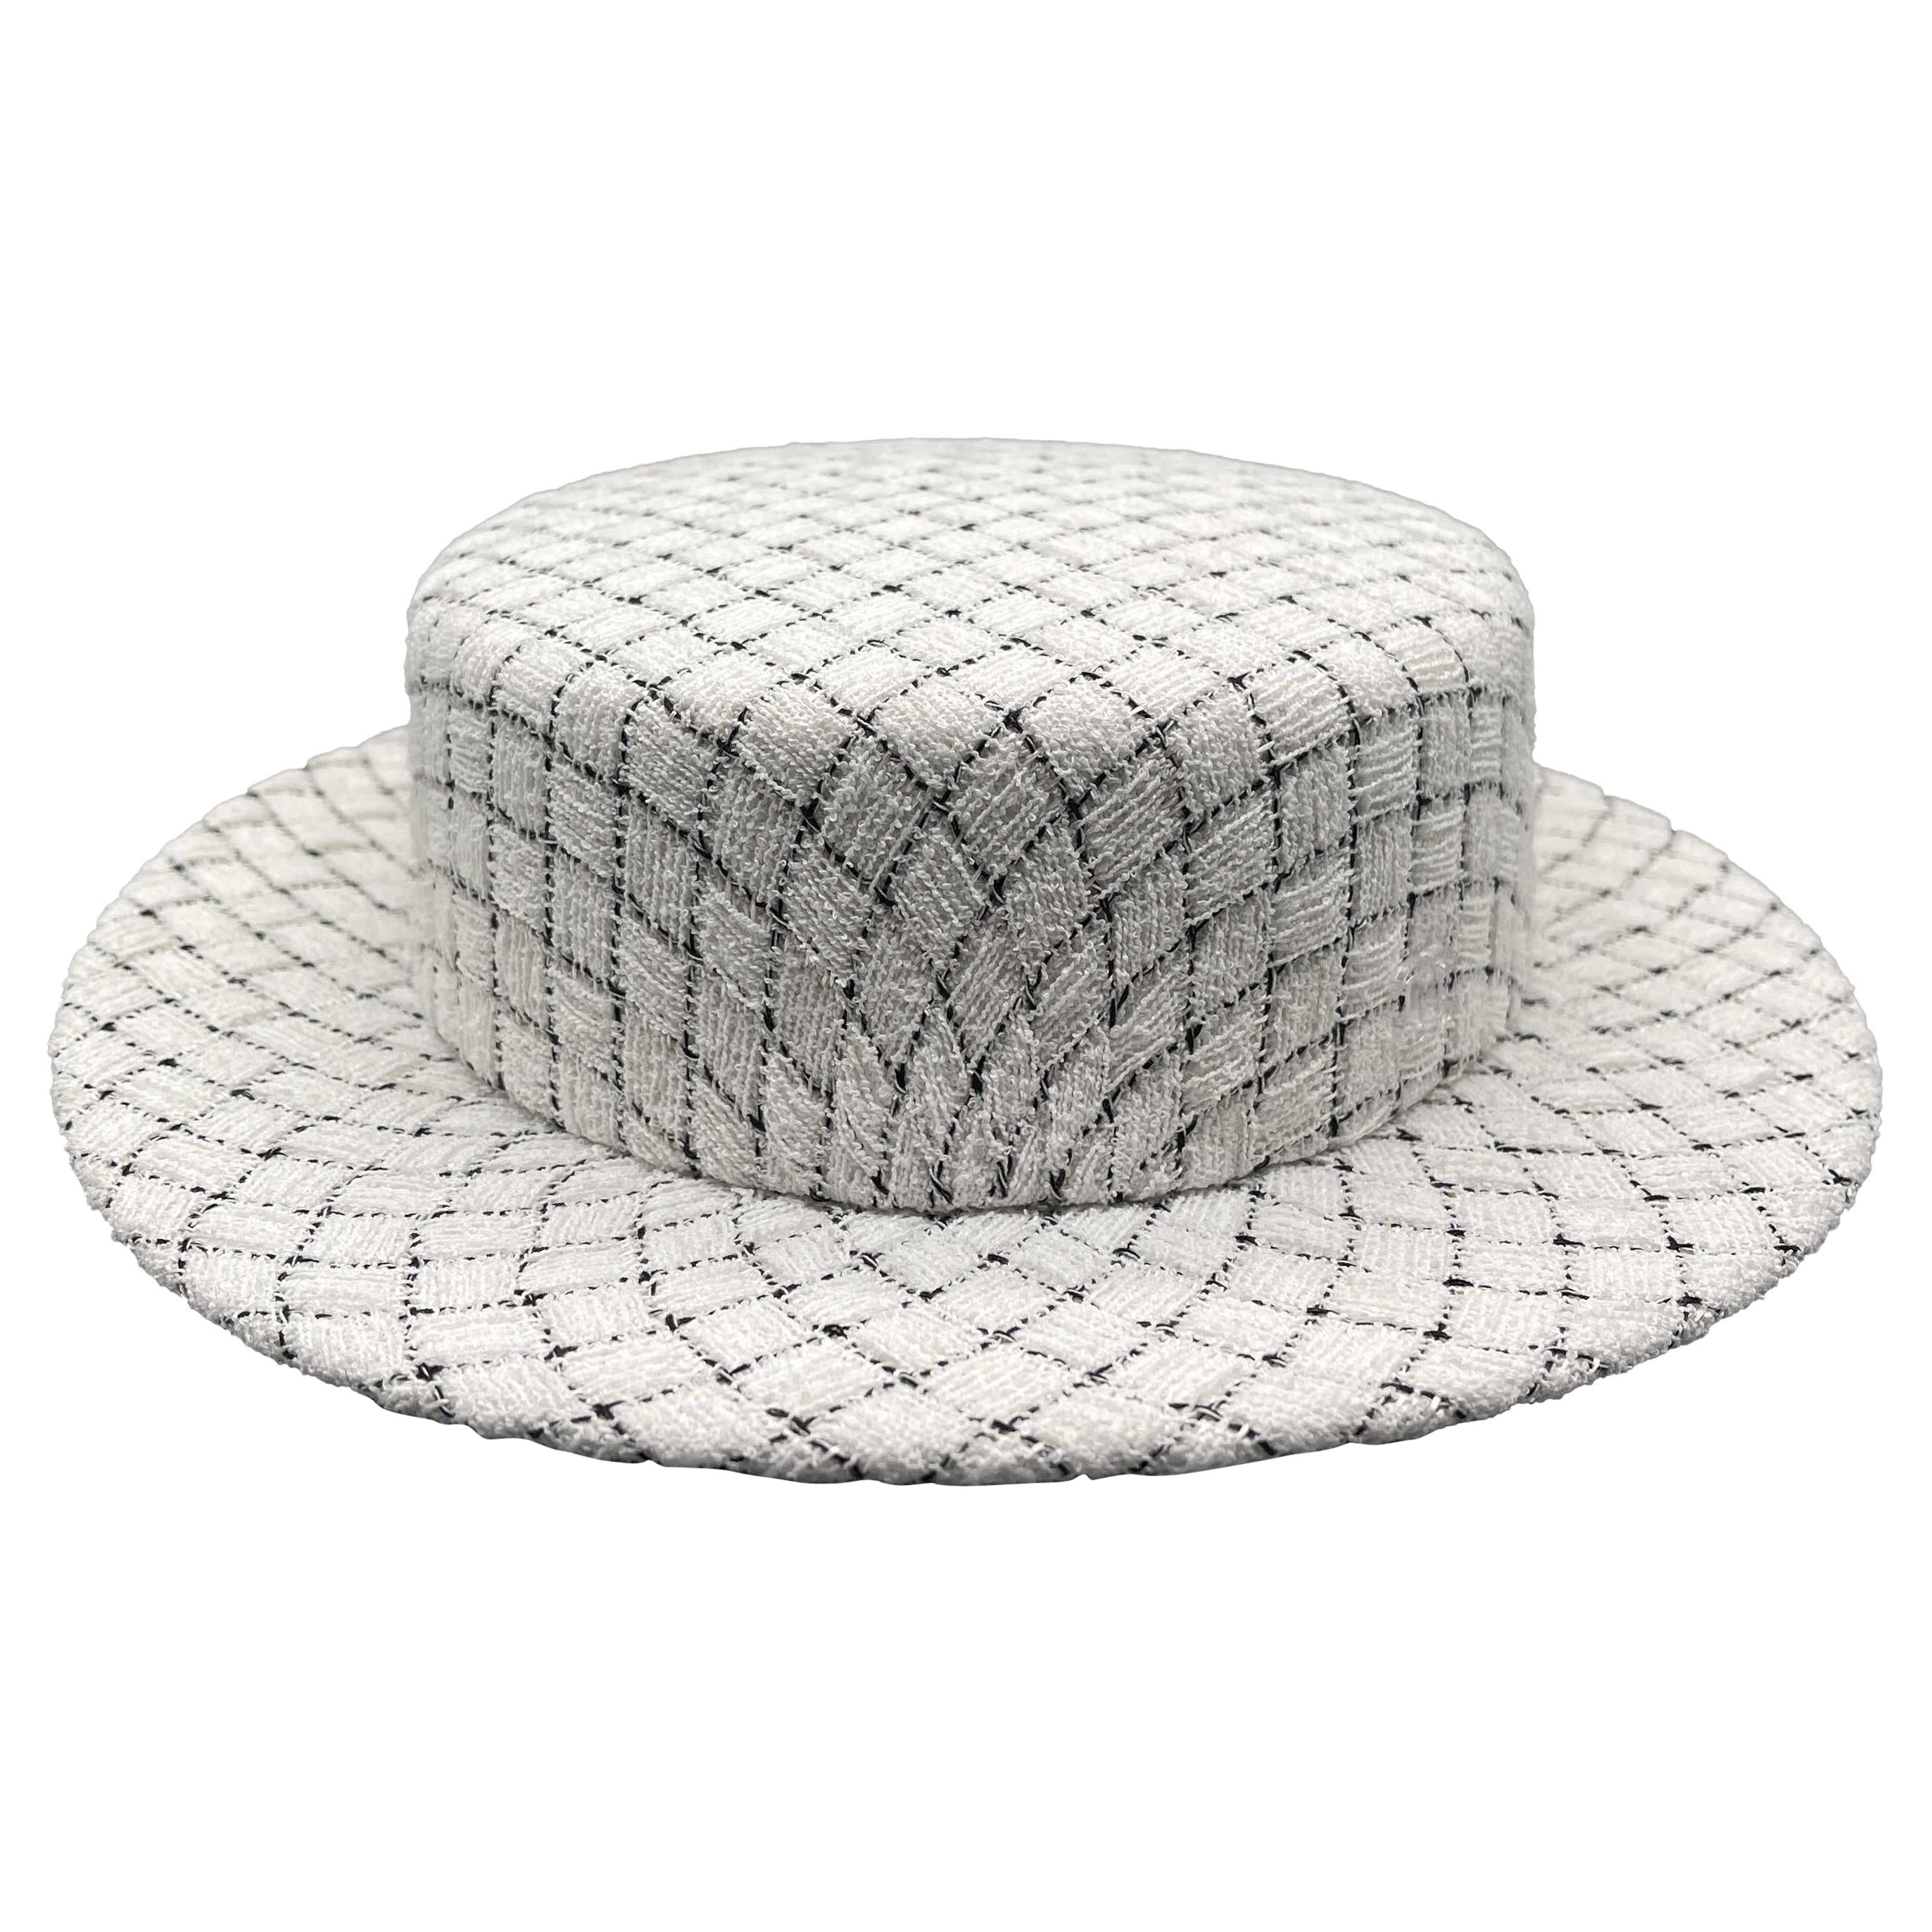 CHANEL Quilted Fantasy Tweed CC Boater Hat Black, White